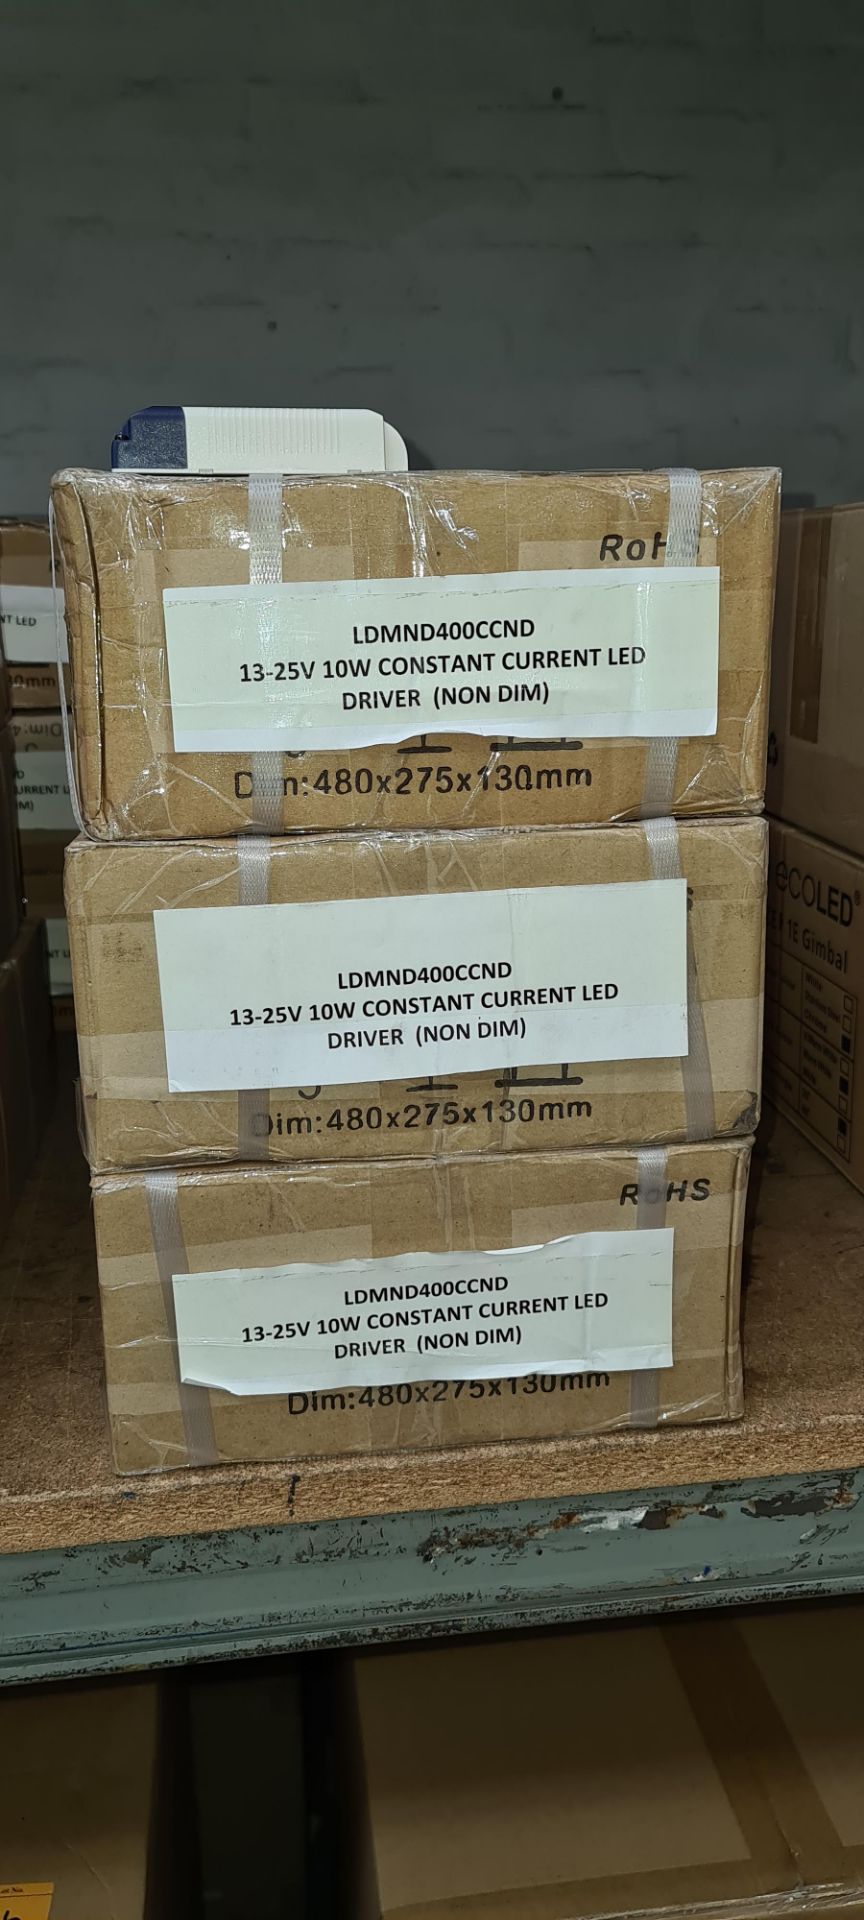 288 off Infitronic LED power supplies model LDMND400CCND - 3 boxes - Image 3 of 6